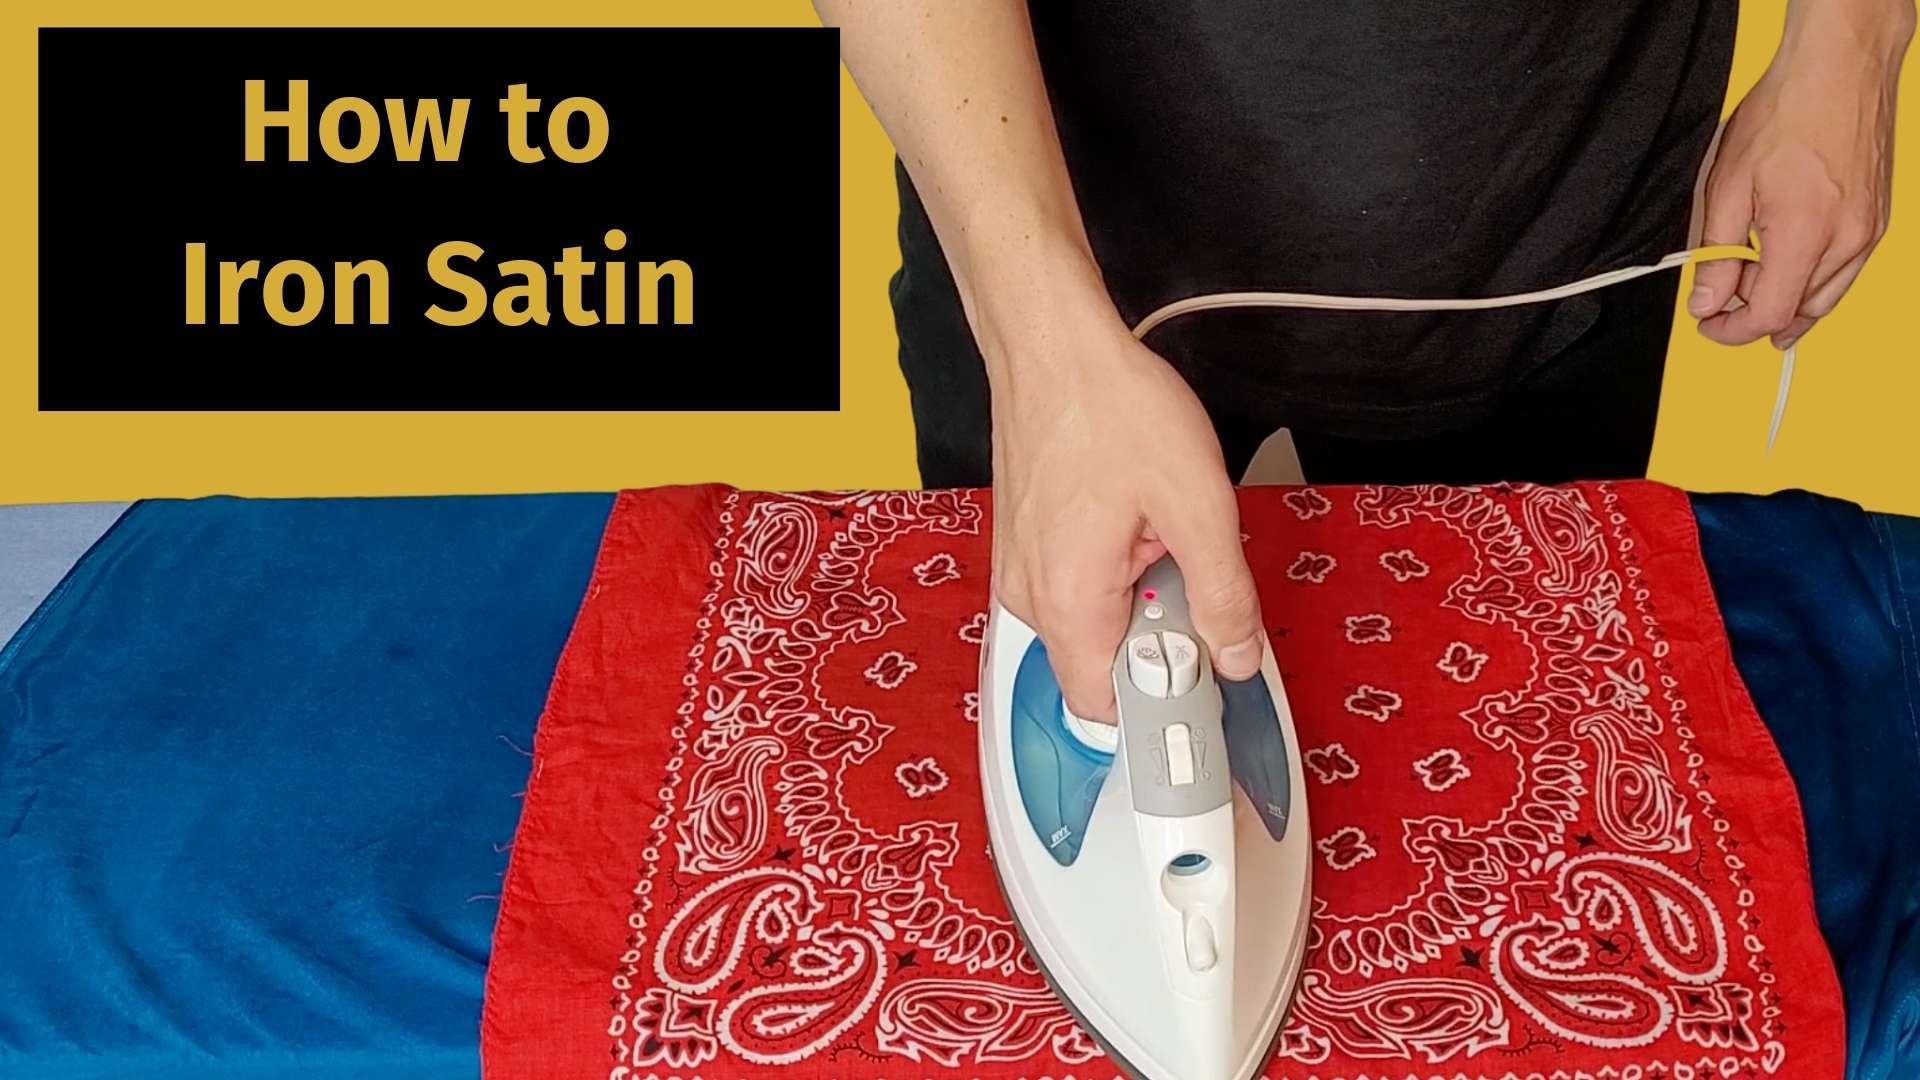 how to iron satin banner image with a picture of a man ironing a satin shirt on an ironing board